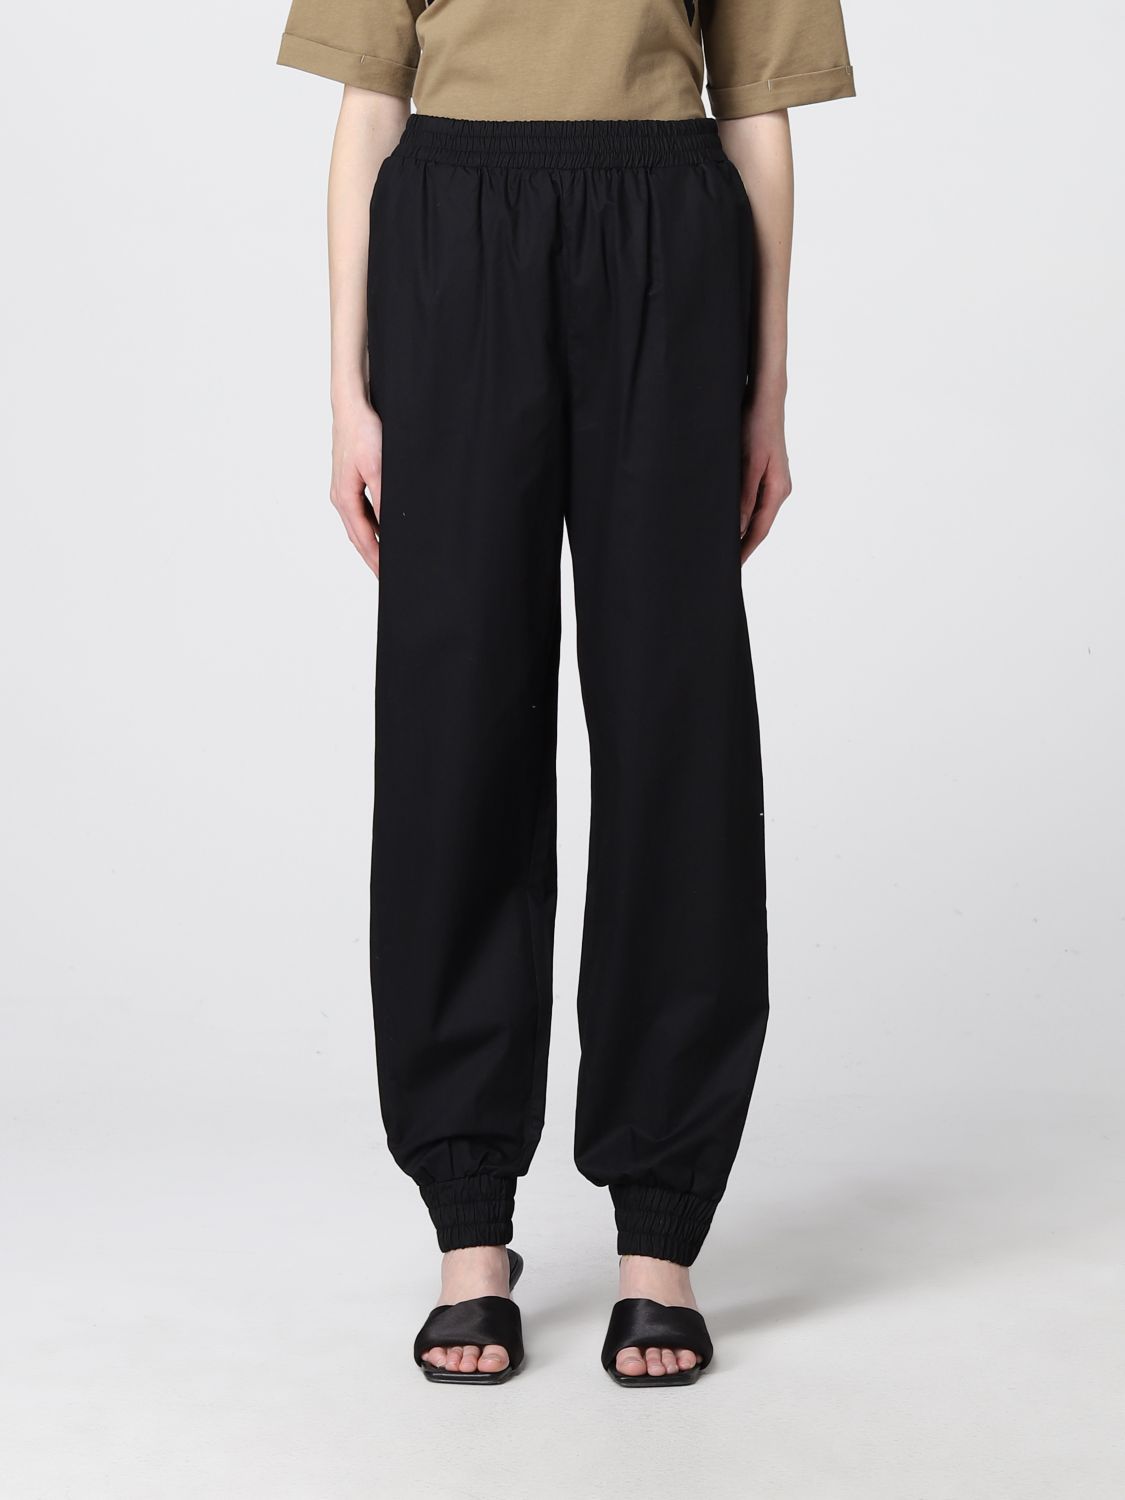 Actitude Twinset Twinset-actitude Cotton Jogging Trousers In Black